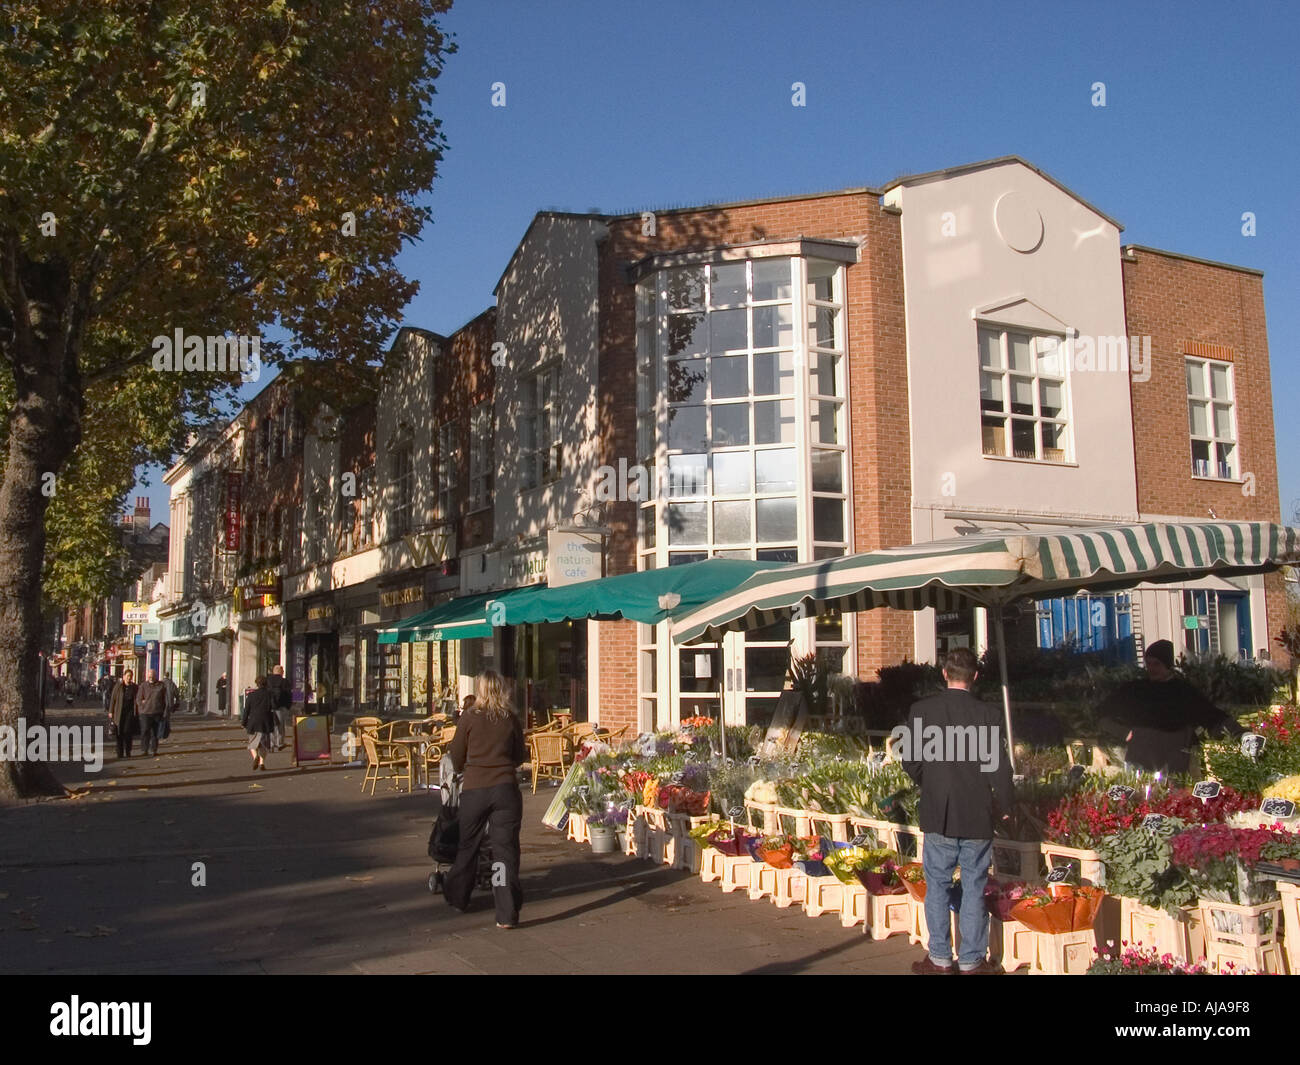 Flower Stall, Chiswick High Road, Chiswick, West London, England, United Kingdom Stock Photo